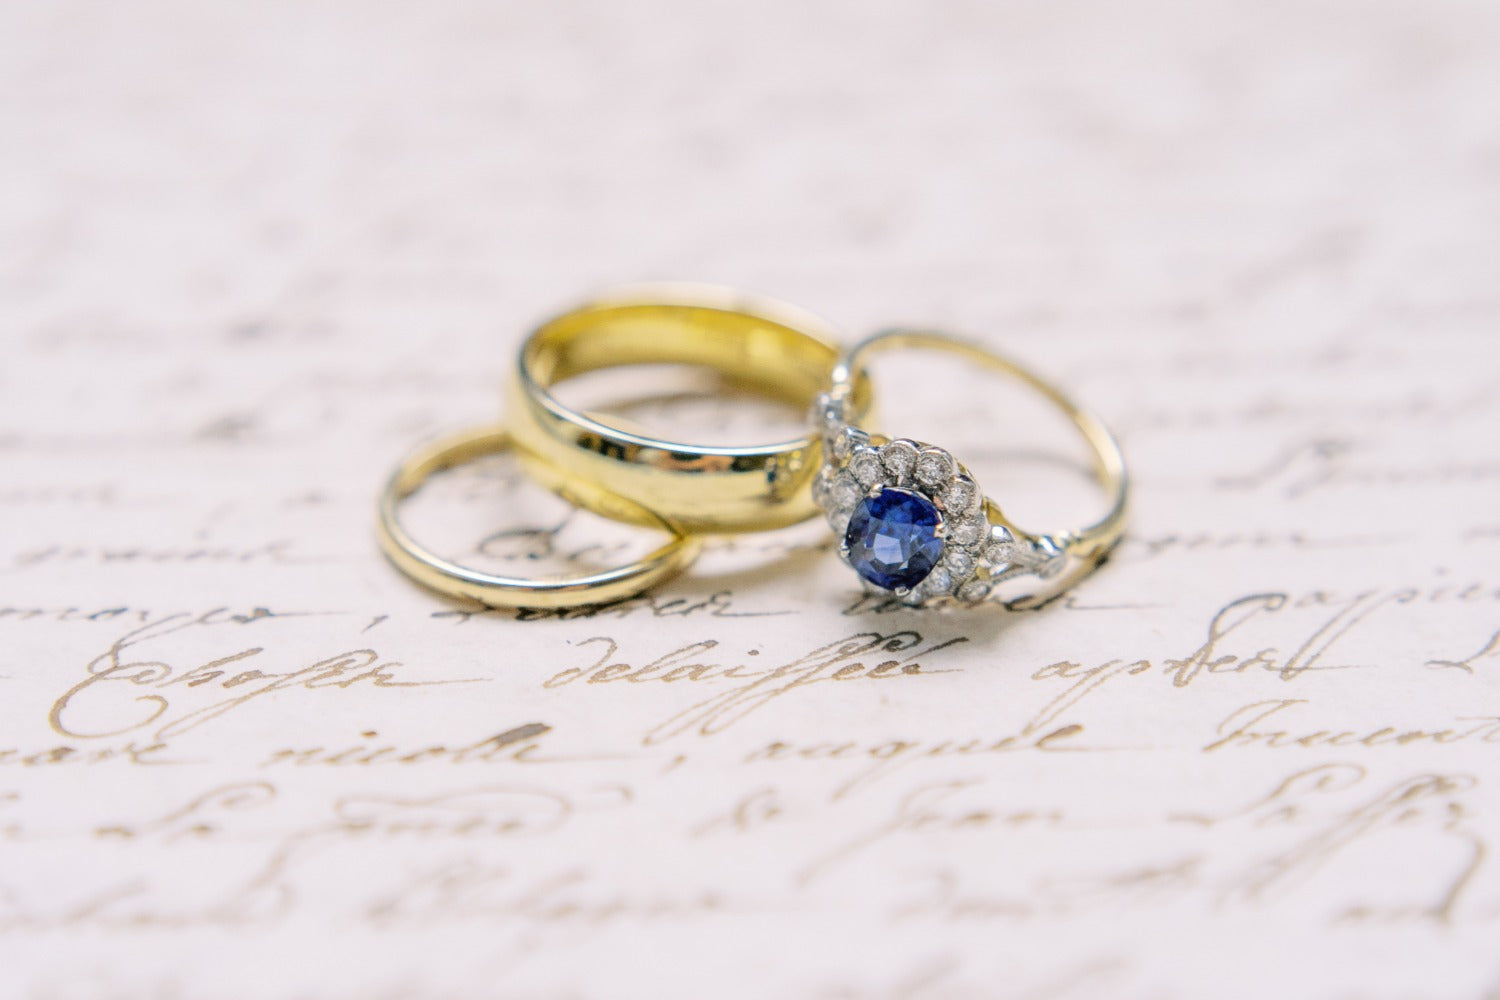 Sapphire and diamond flower ring with yellow gold wedding rings